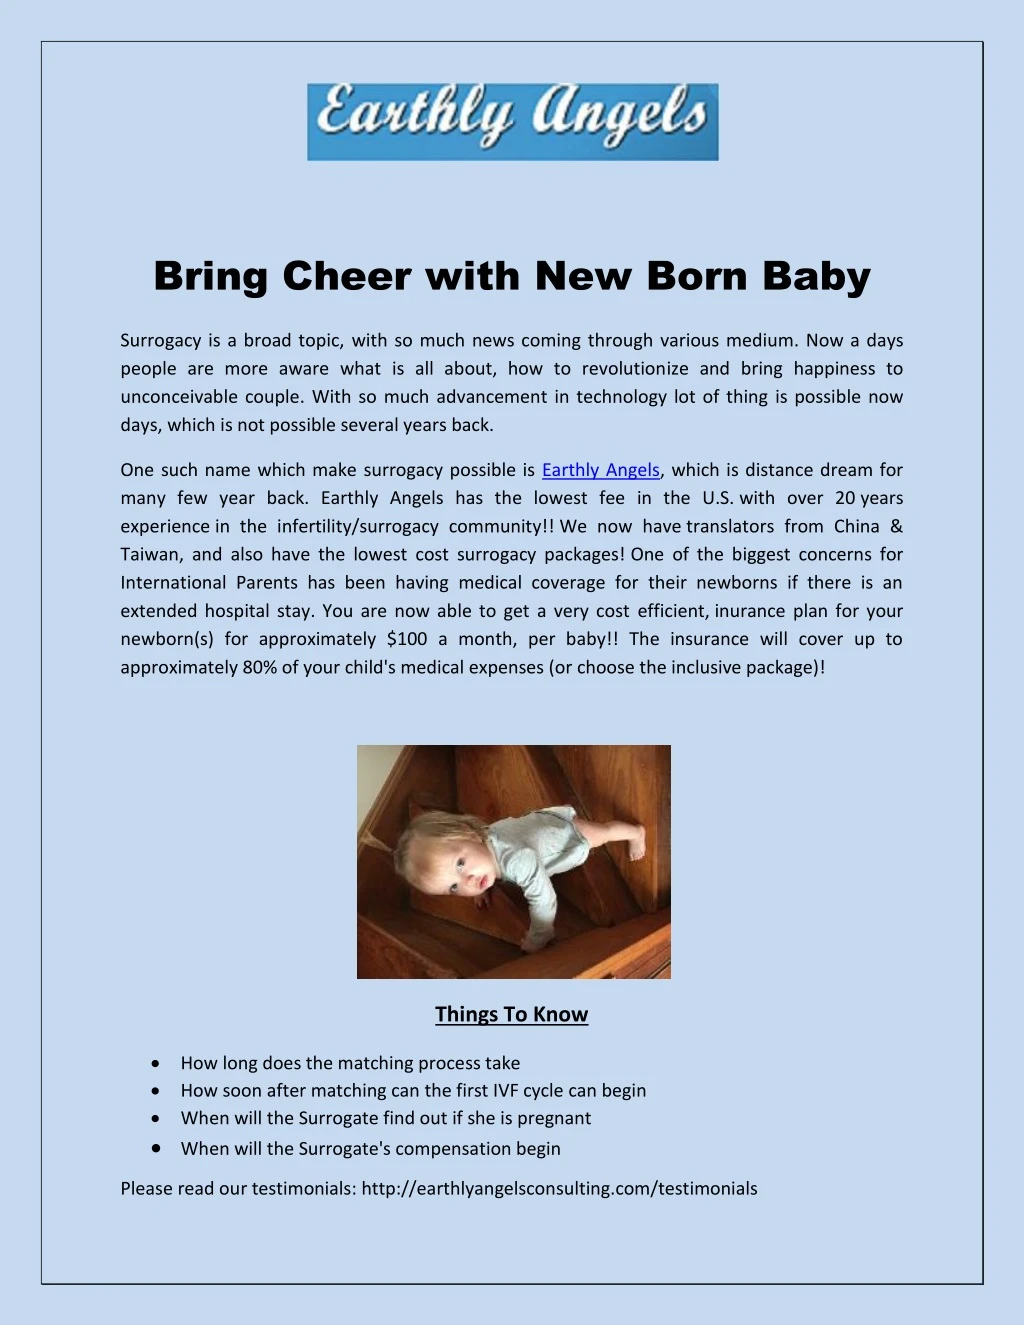 bring cheer with new born baby